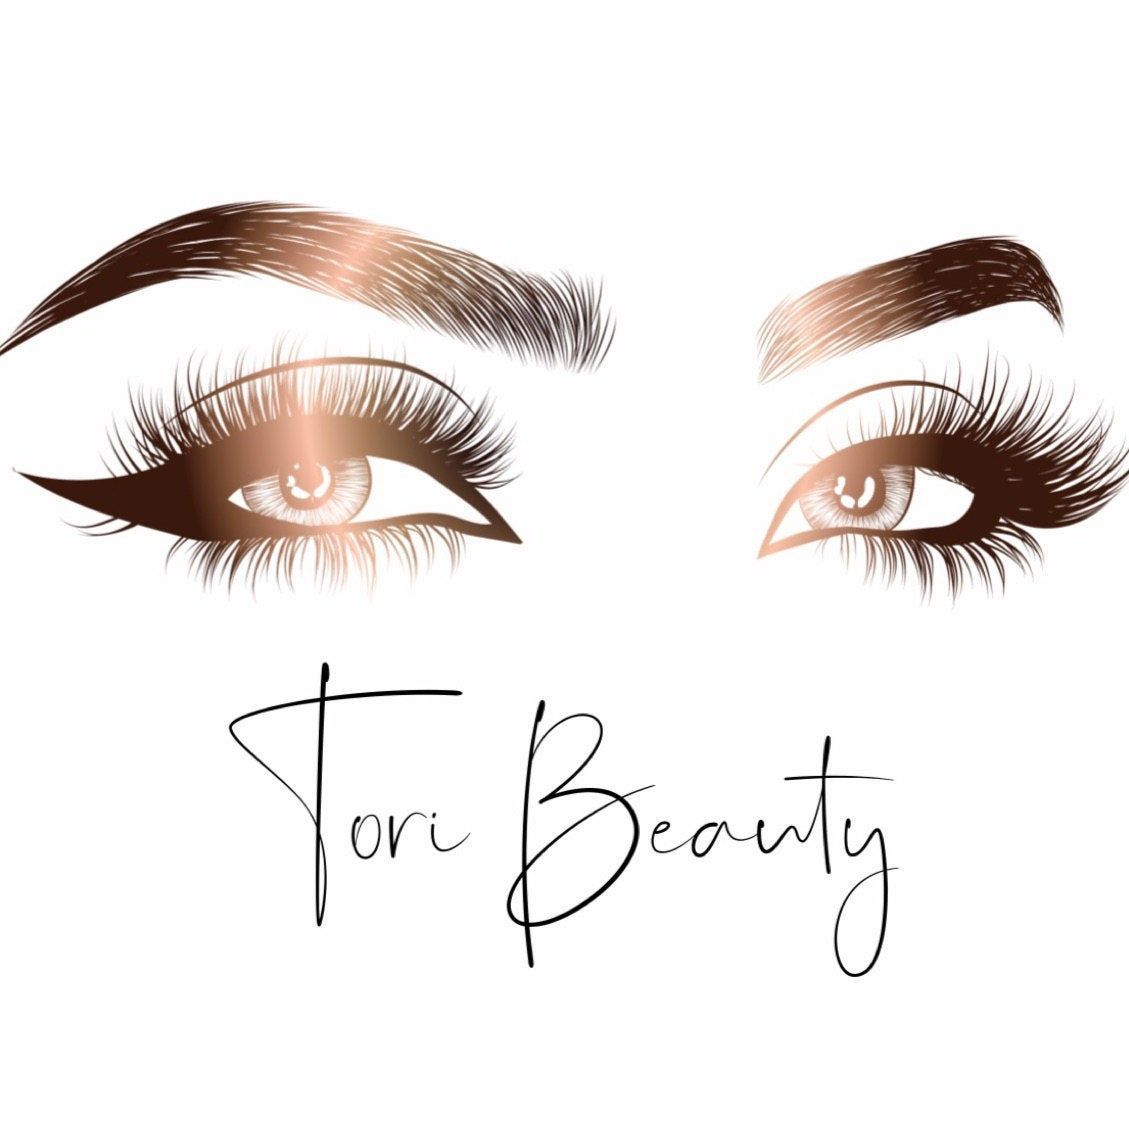 12 beauty Logo pictures ideas